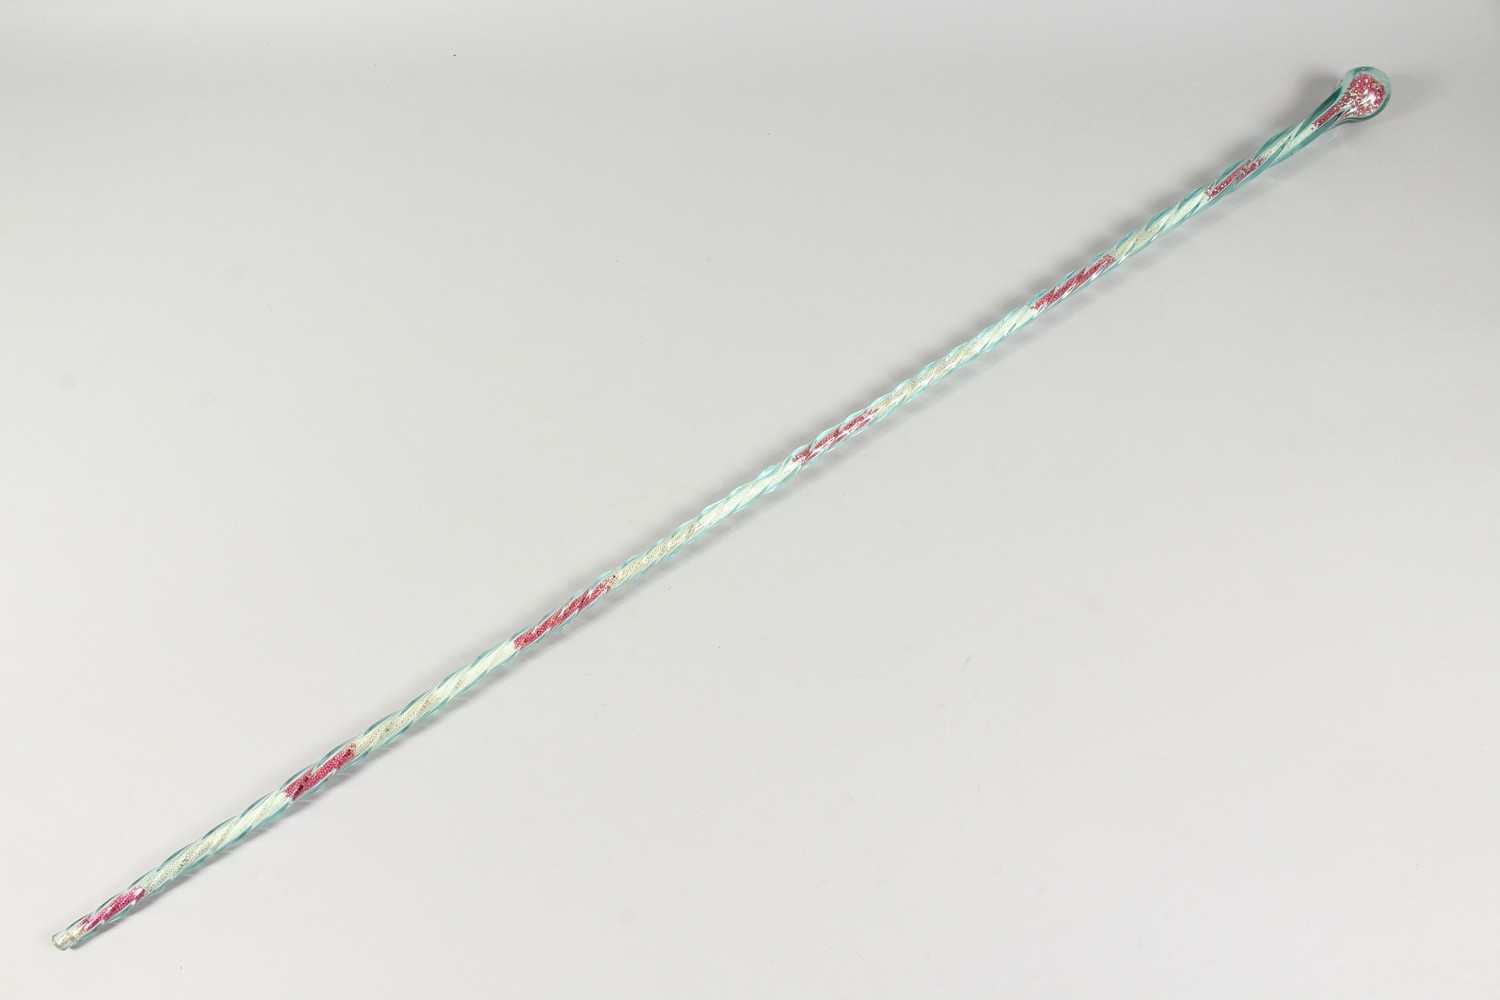 A LONG NAILSEA SPIRAL TWIST GLASS WALKING STICK, inside are thousands of tiny beads. - Image 8 of 8